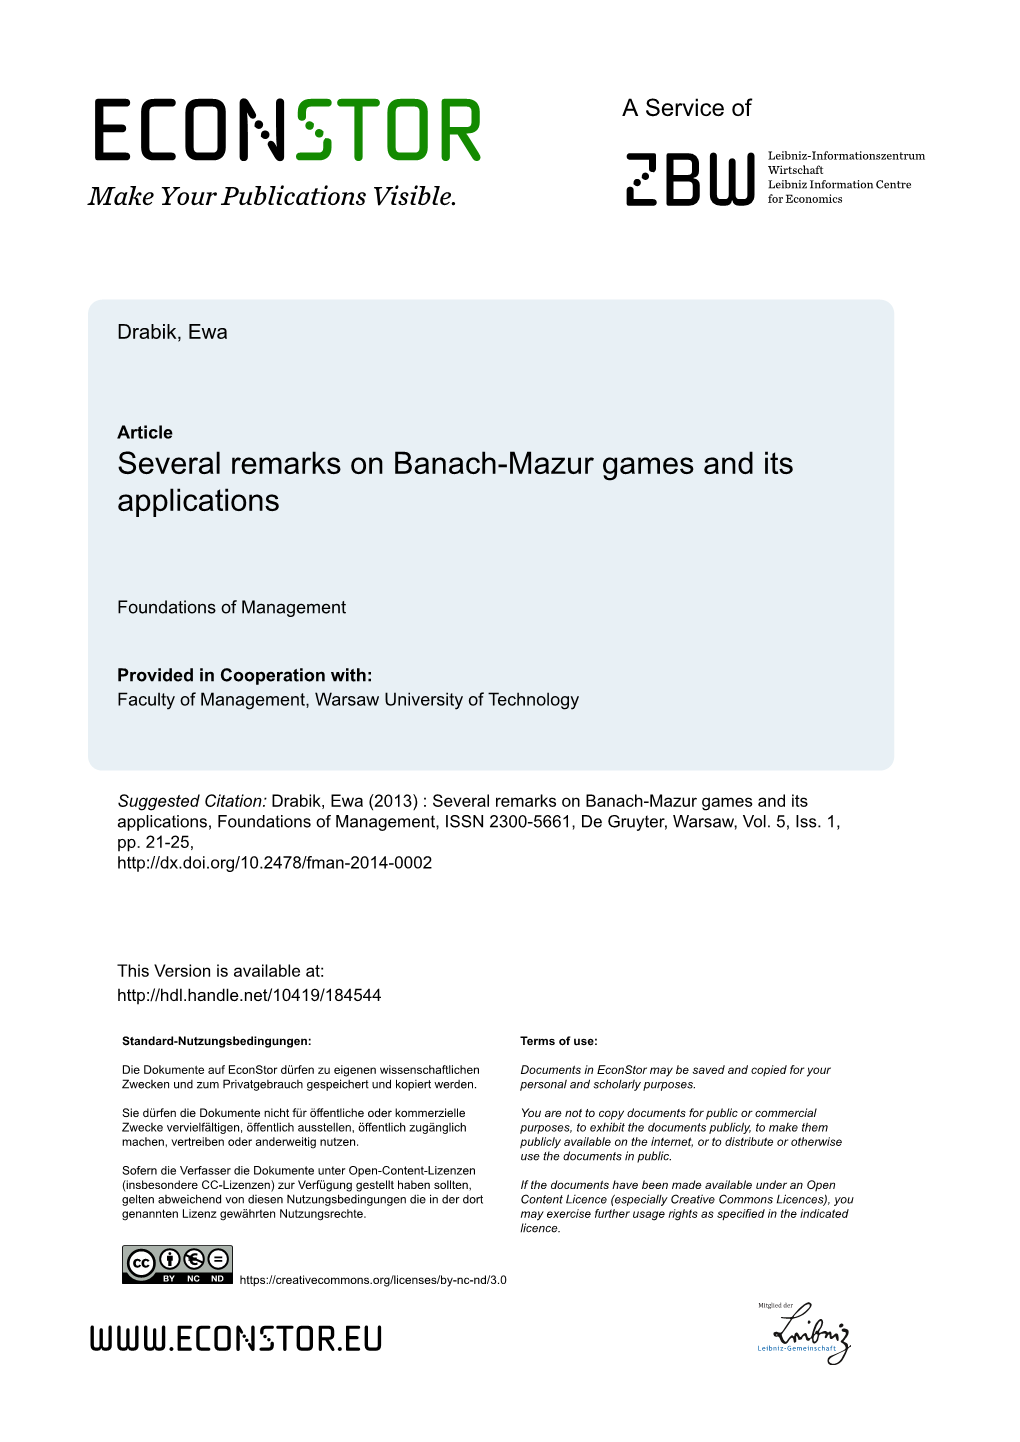 Several Remarks on Banach-Mazur Games and Its Applications